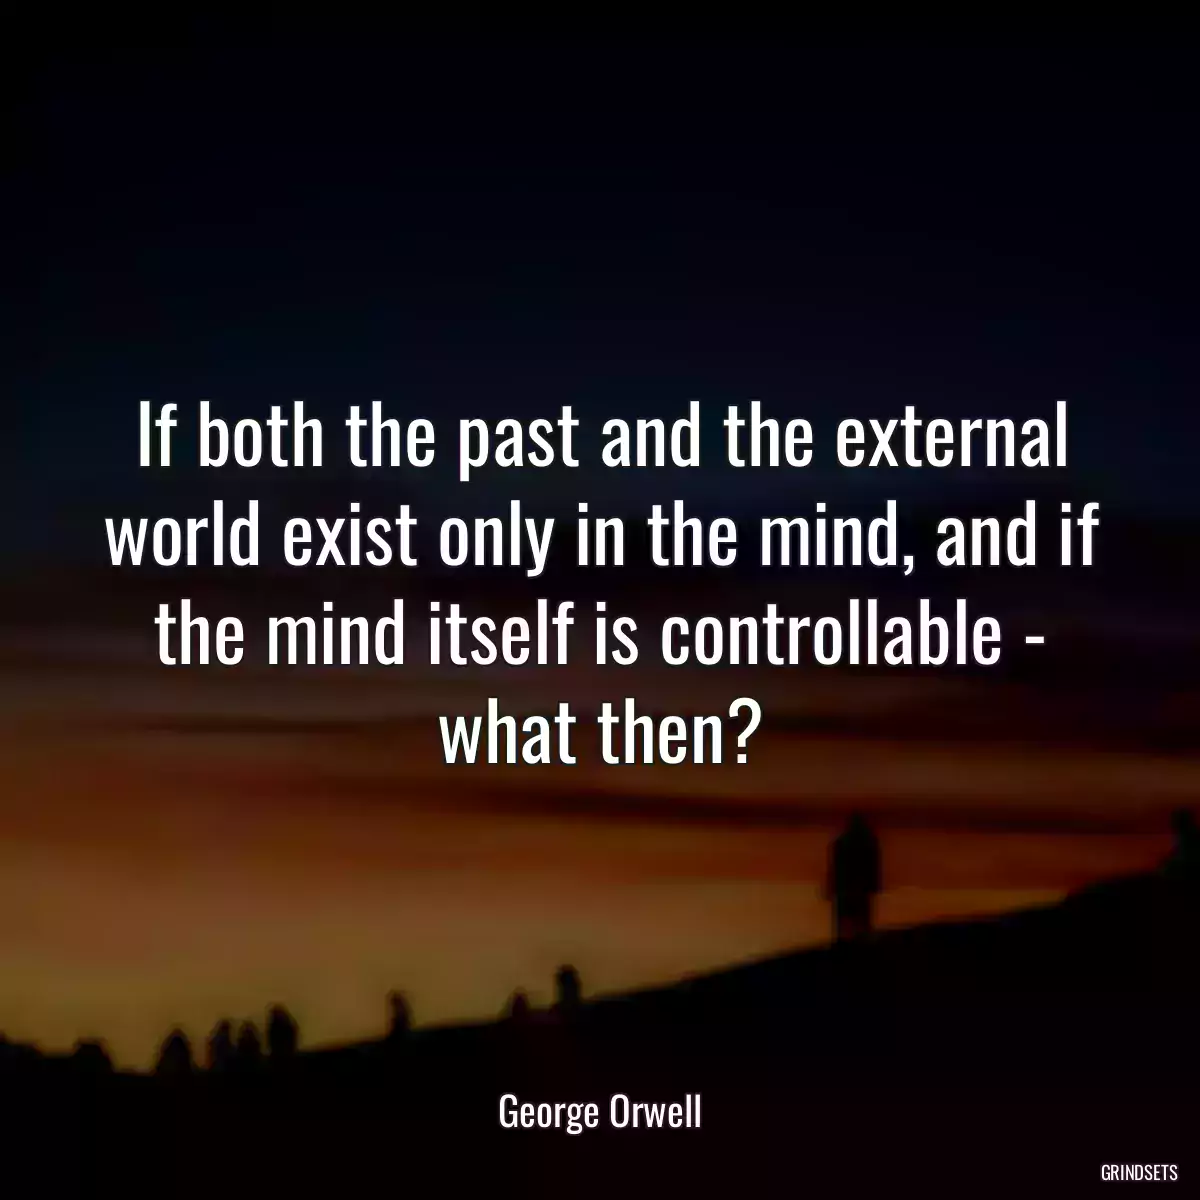 If both the past and the external world exist only in the mind, and if the mind itself is controllable - what then?